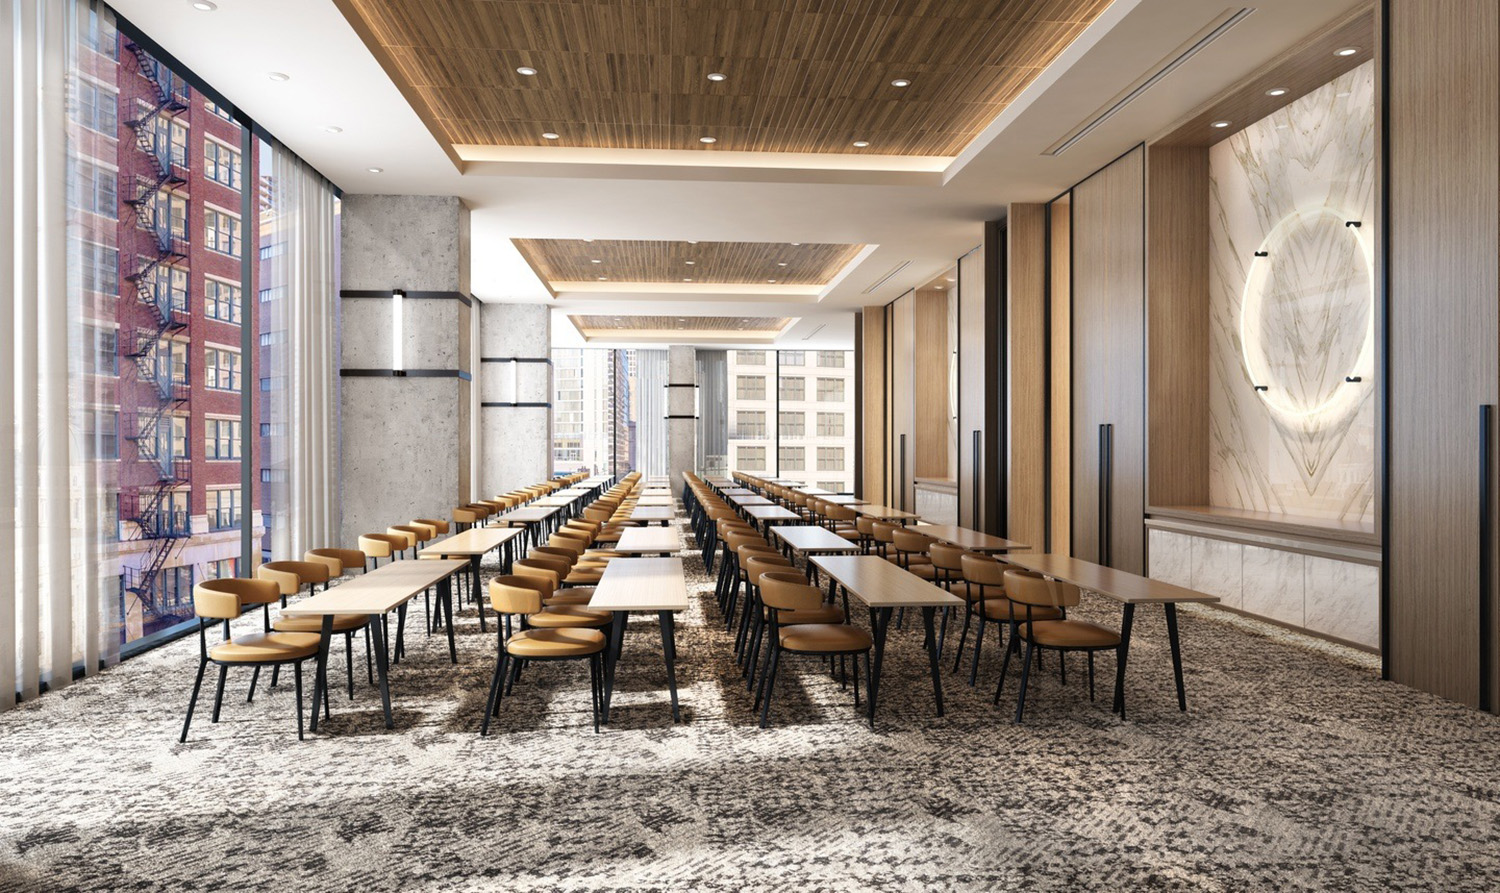 On Demand Meeting Space at Rivere. Rendering by Goettsch Partners